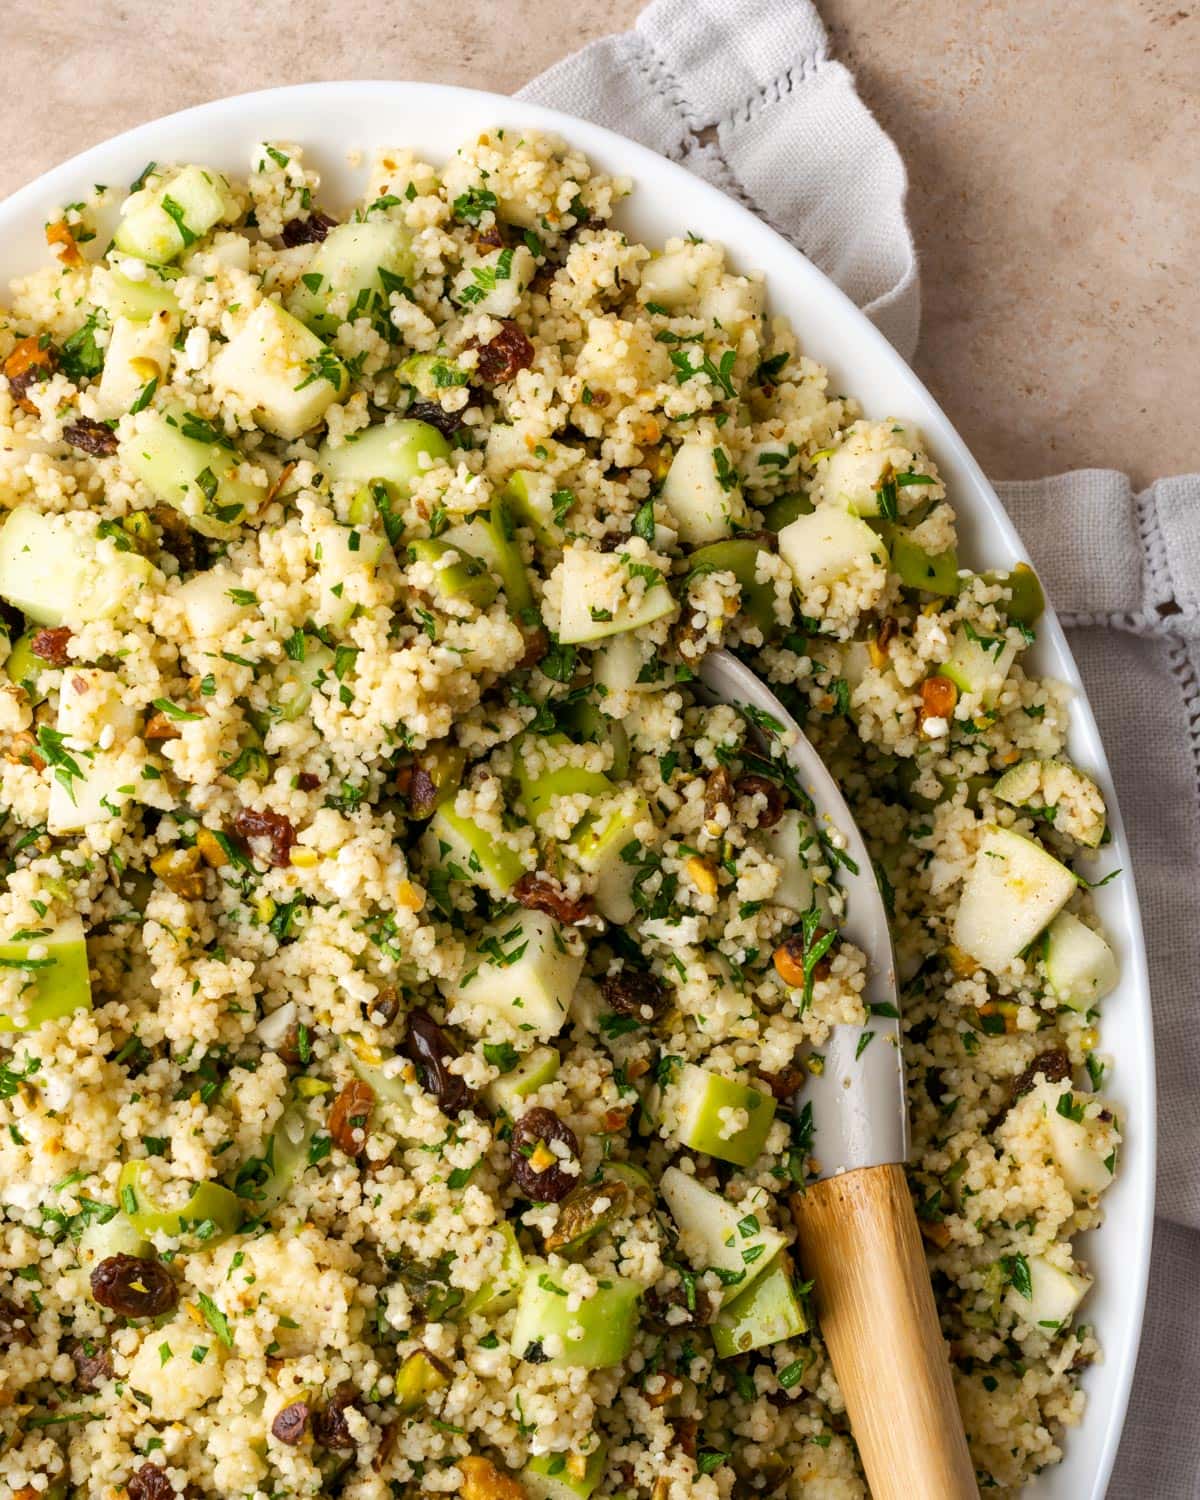 Top view of a large platter of Mediterranean couscous salad with a wooden serving spoon.